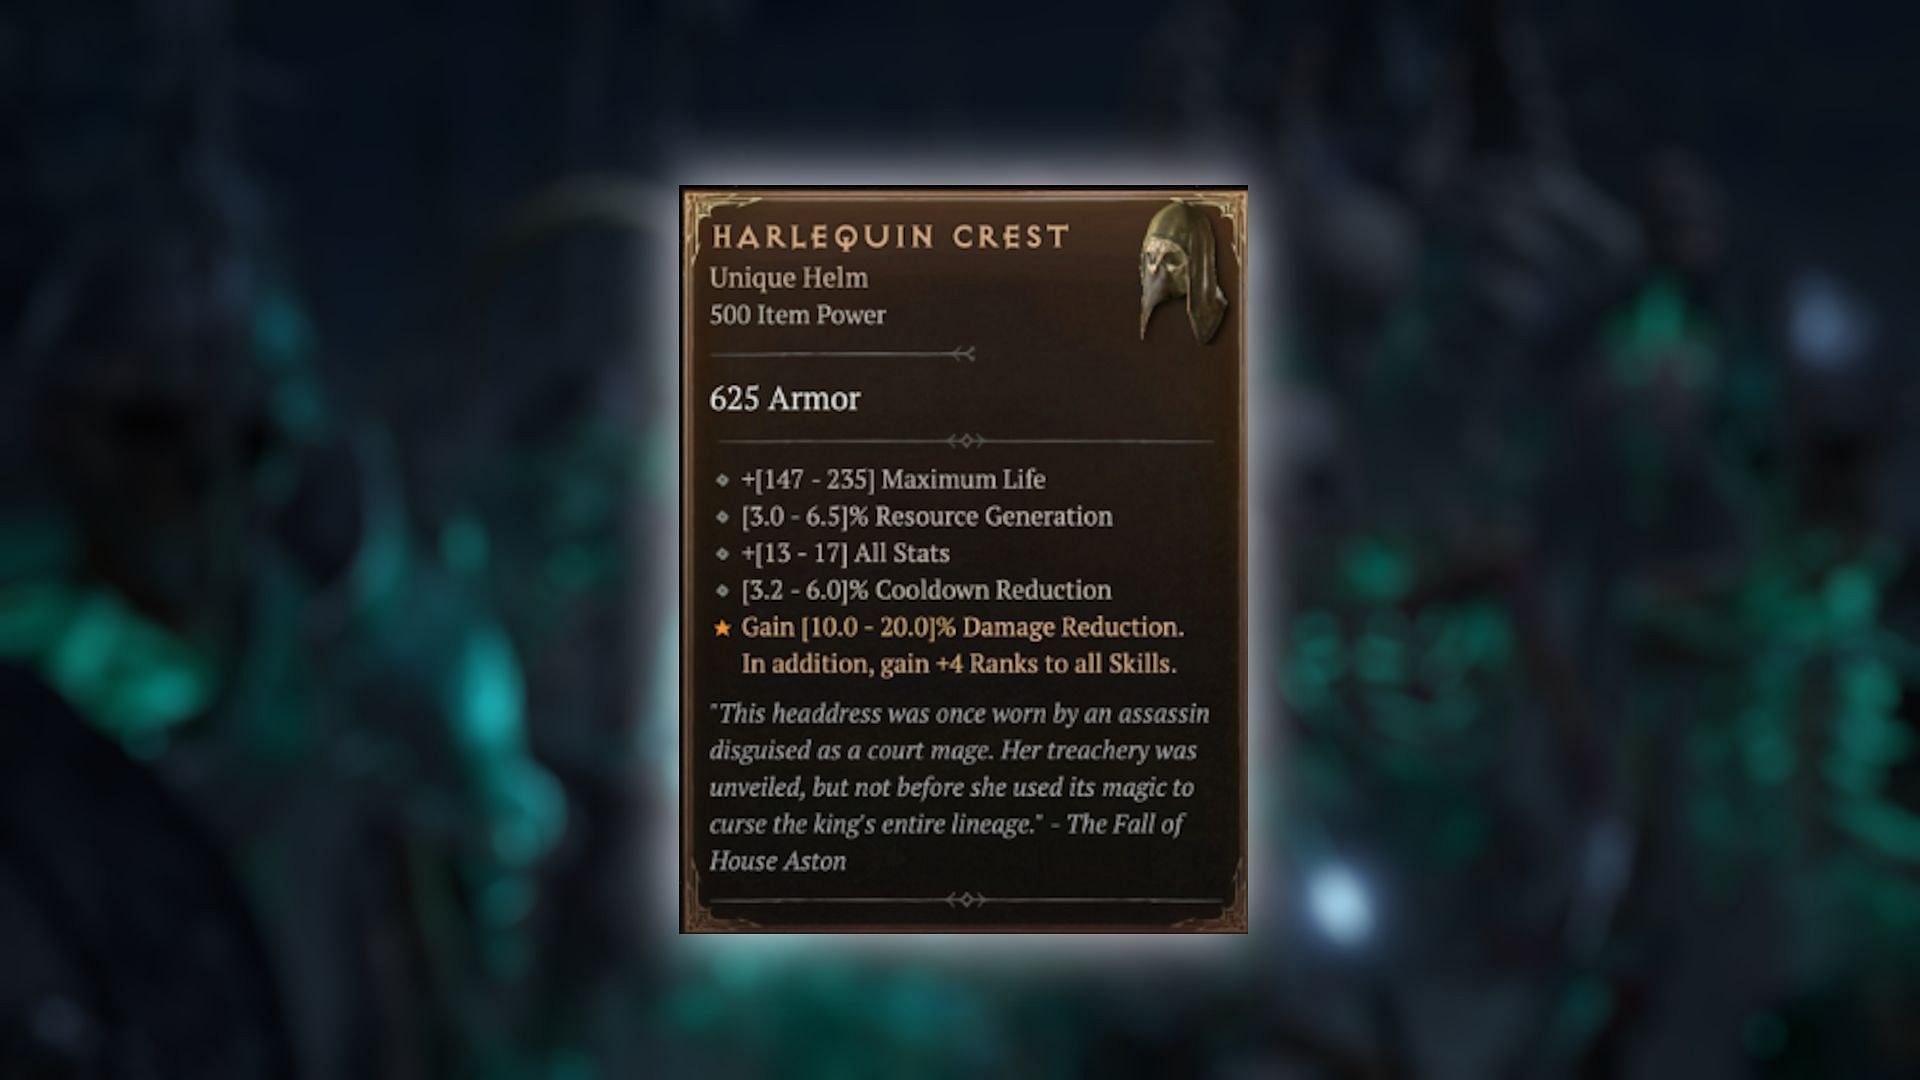 Harlequin Crest is one of the strongest Uber Uniques in Diablo 4 (Image via Blizzard Entertainment)